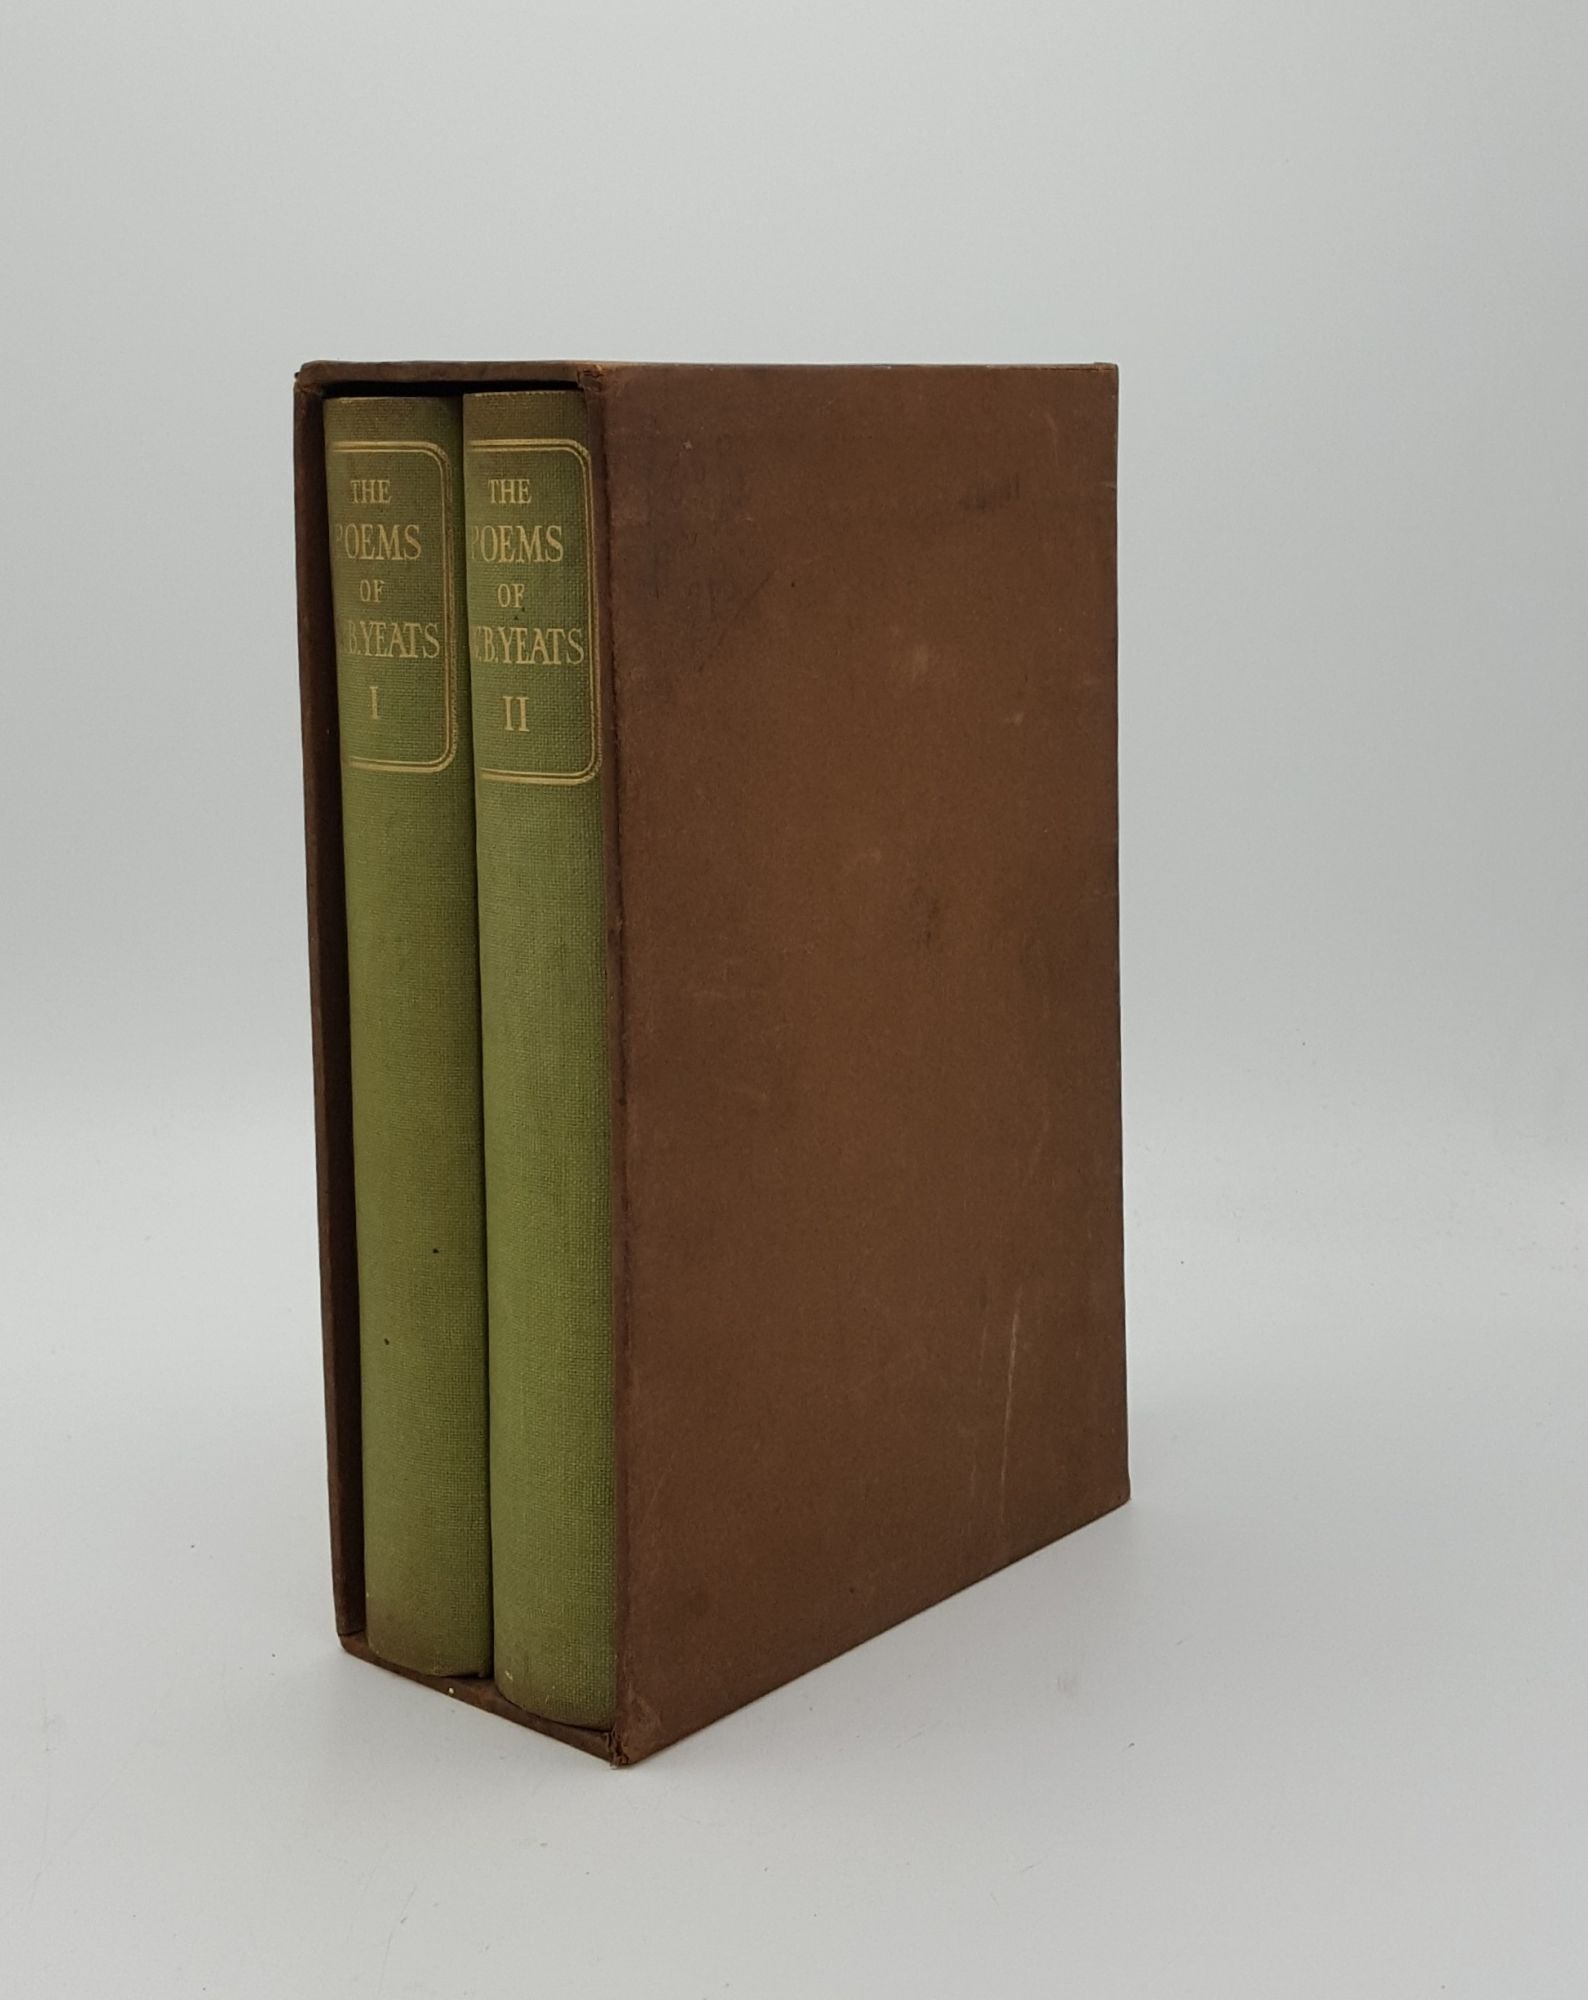 YEATS W.B. - The Poems of W.B. Yeats in Two Volumes